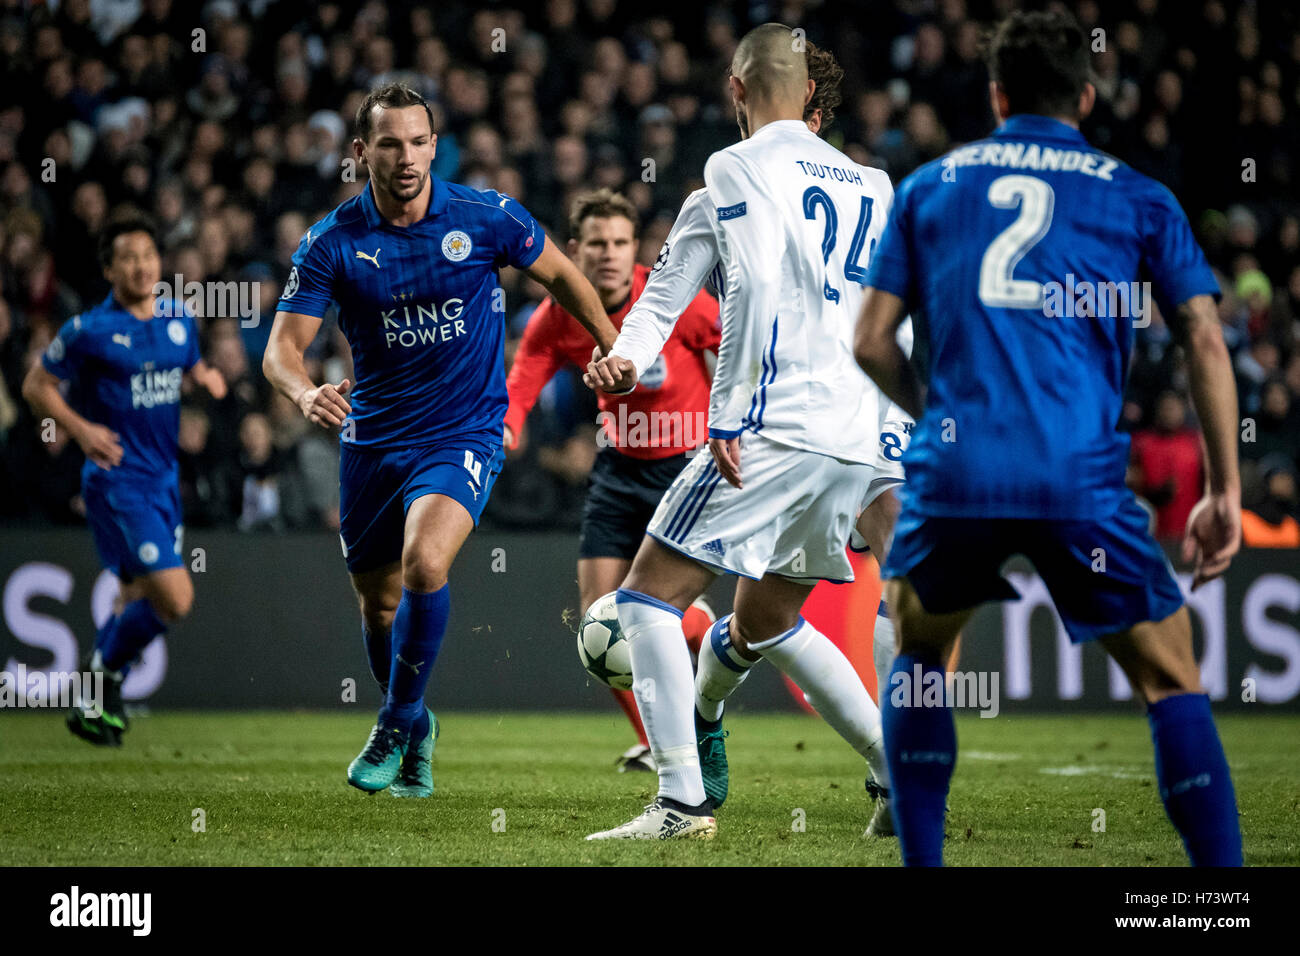 Denmark, Copenhagen, November 2nd 2016. Danny Drinkwate (4) of Leicester City seen during the UEFA Champions League’s Group G match between FC Copenhagen and Leicester City at Telia Parken Stock Photo